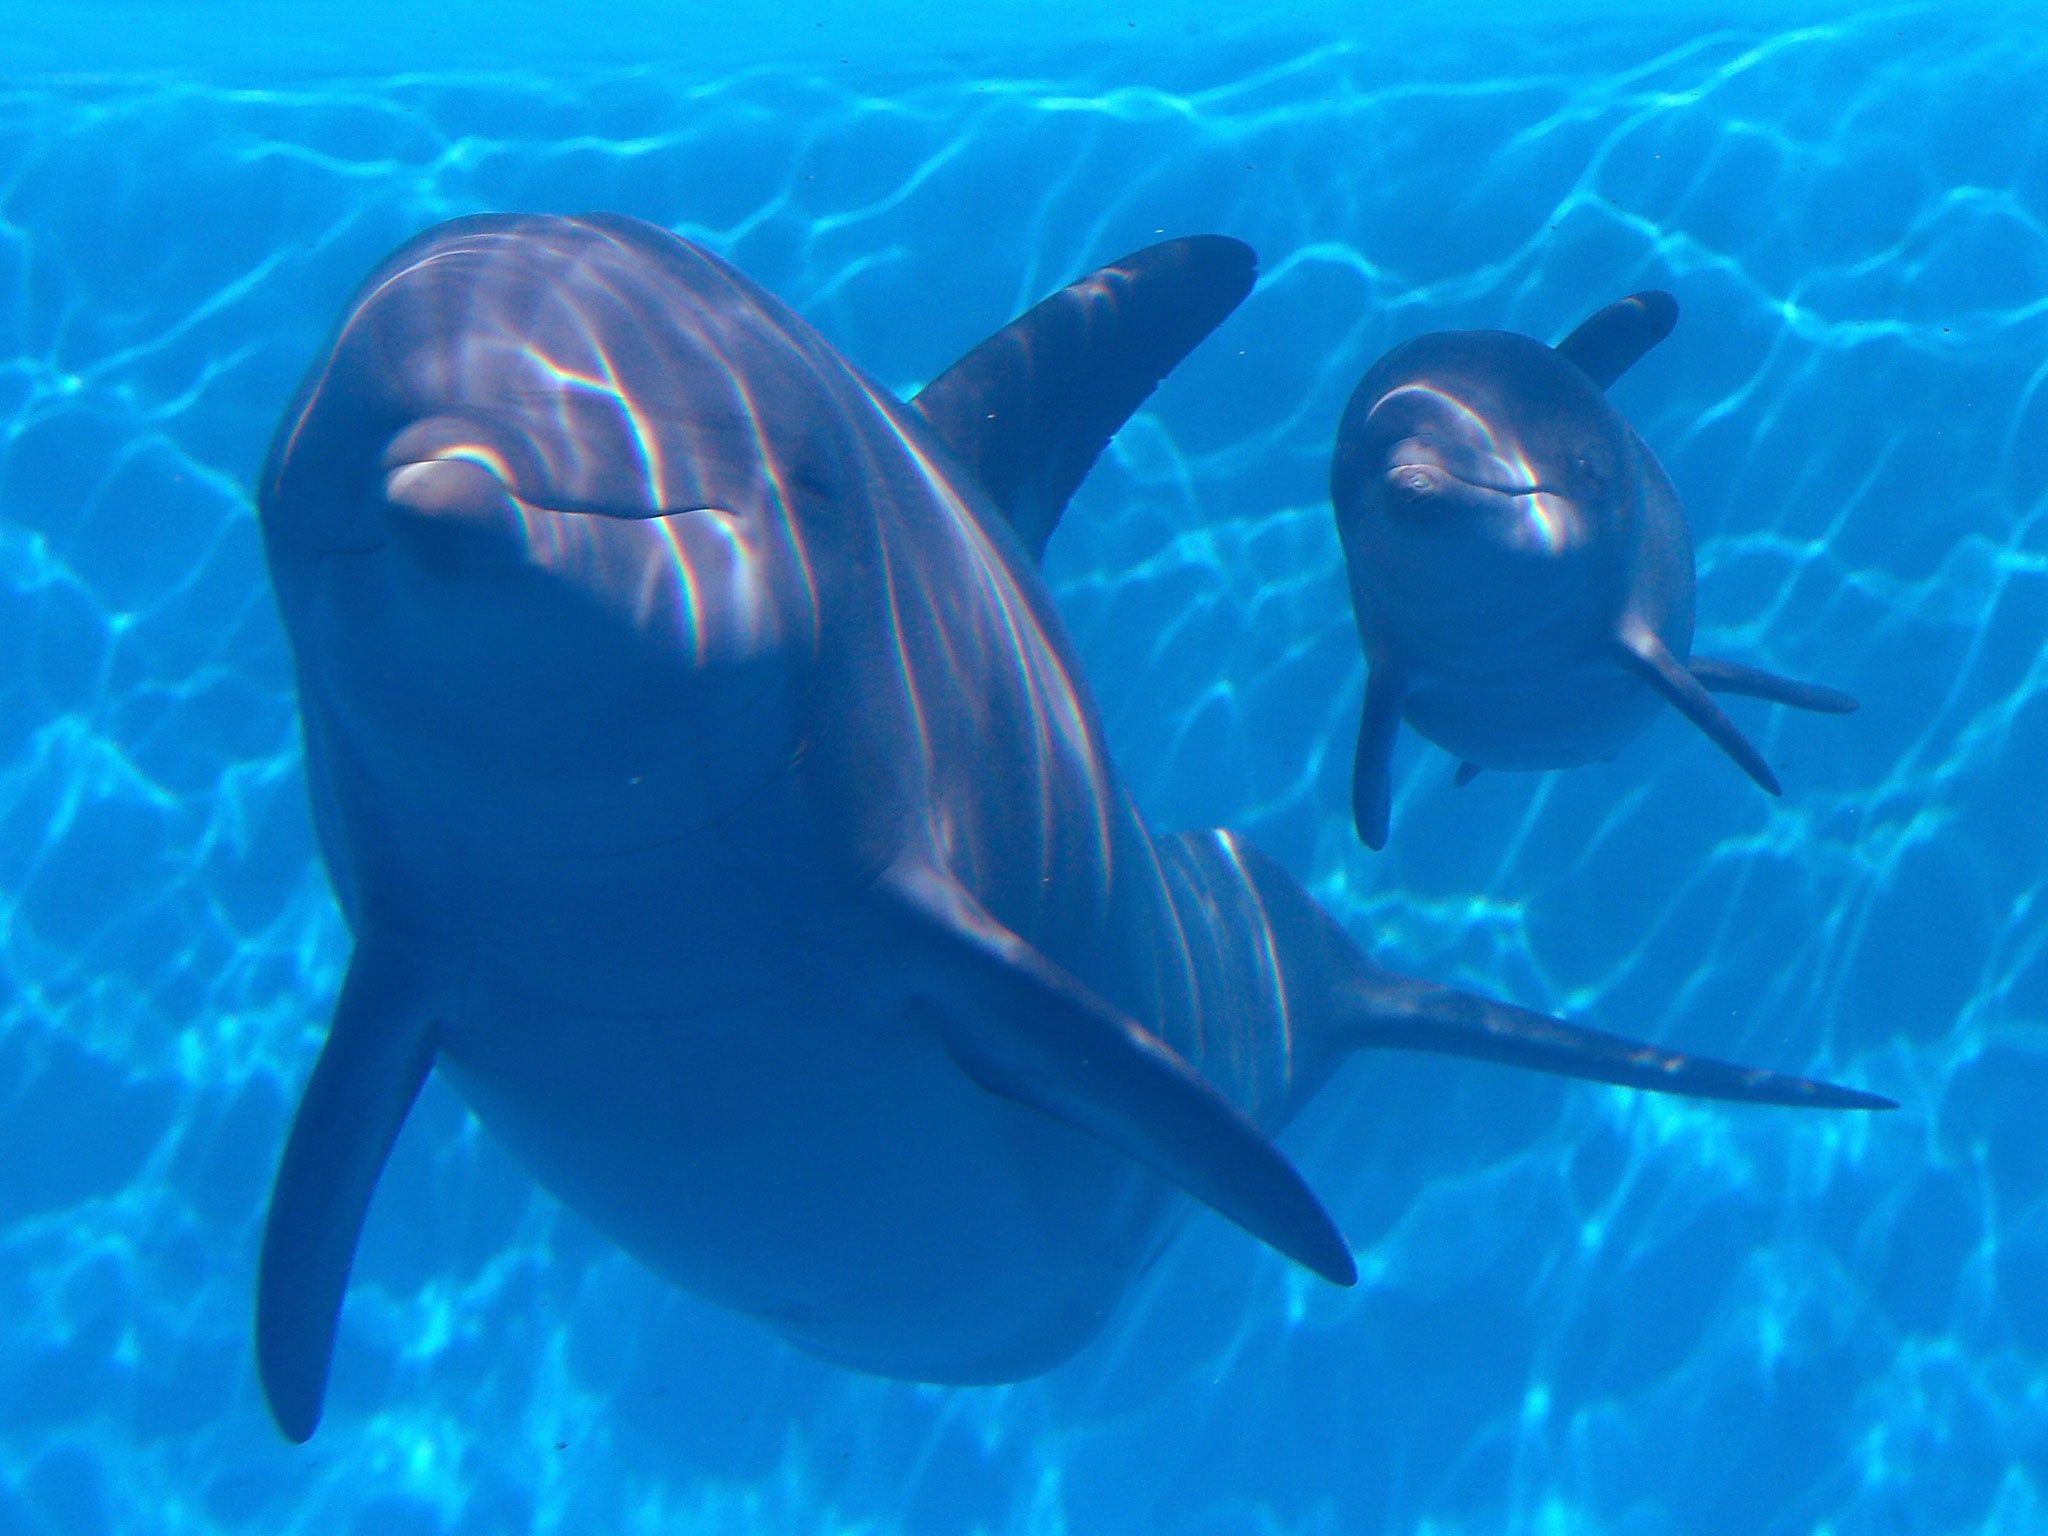 Ukraine's military dolphins will be transferred to the Russian navy following the annexation of Crimea